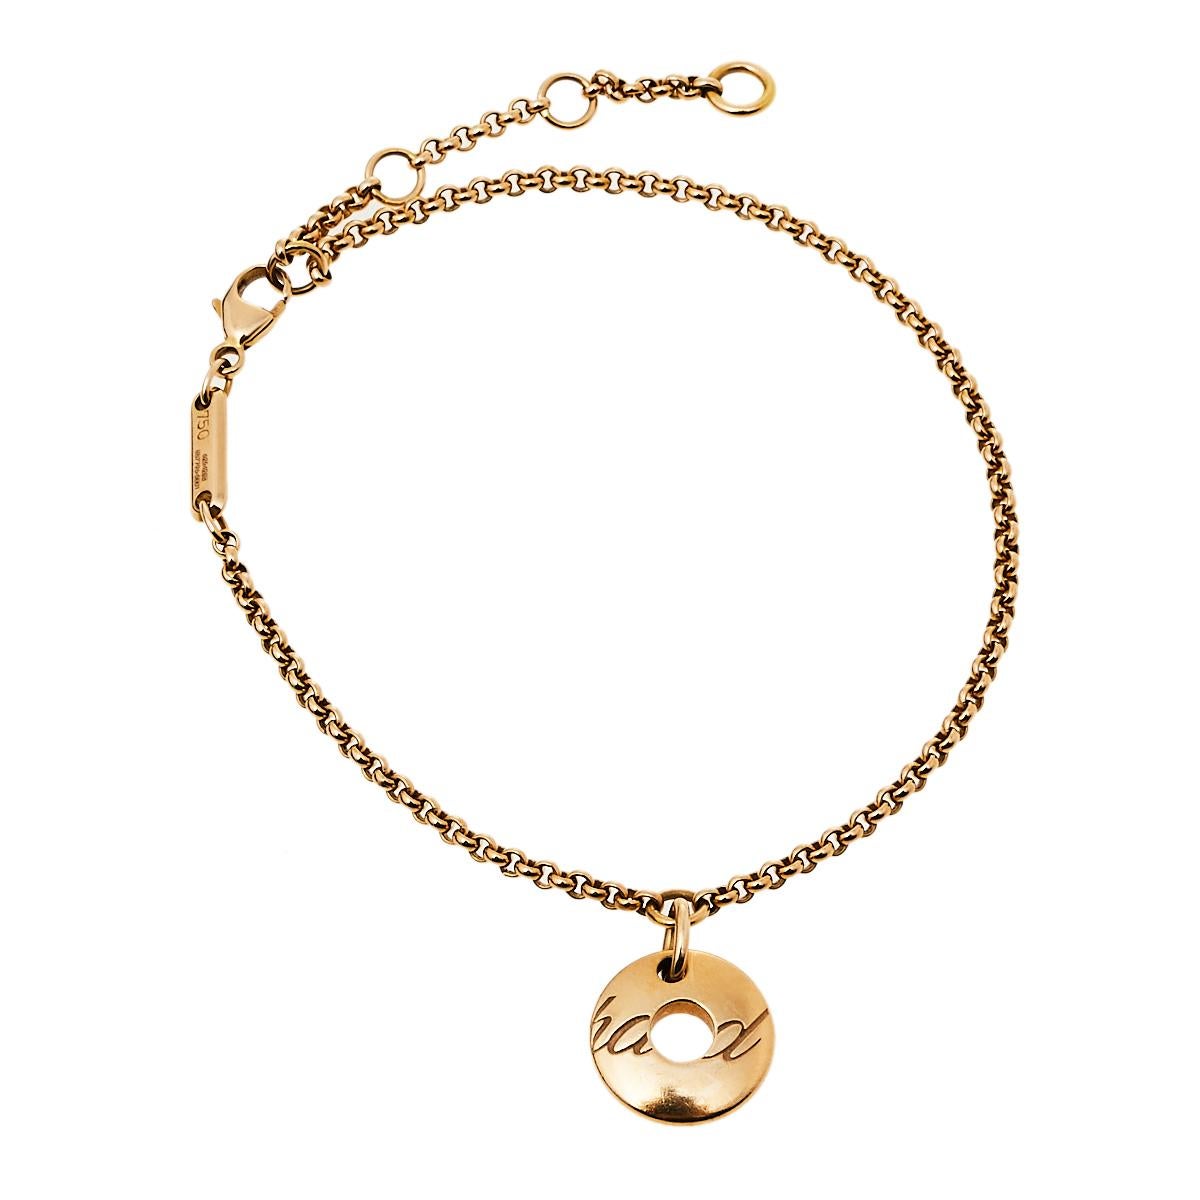 Artfully made, this flawless bracelet by Chopard can be your next prized possession. True to Chopard's spirit of perfection, this piece was sculpted using 18k rose gold. The bracelet features a circular charm that has signature engravings and three